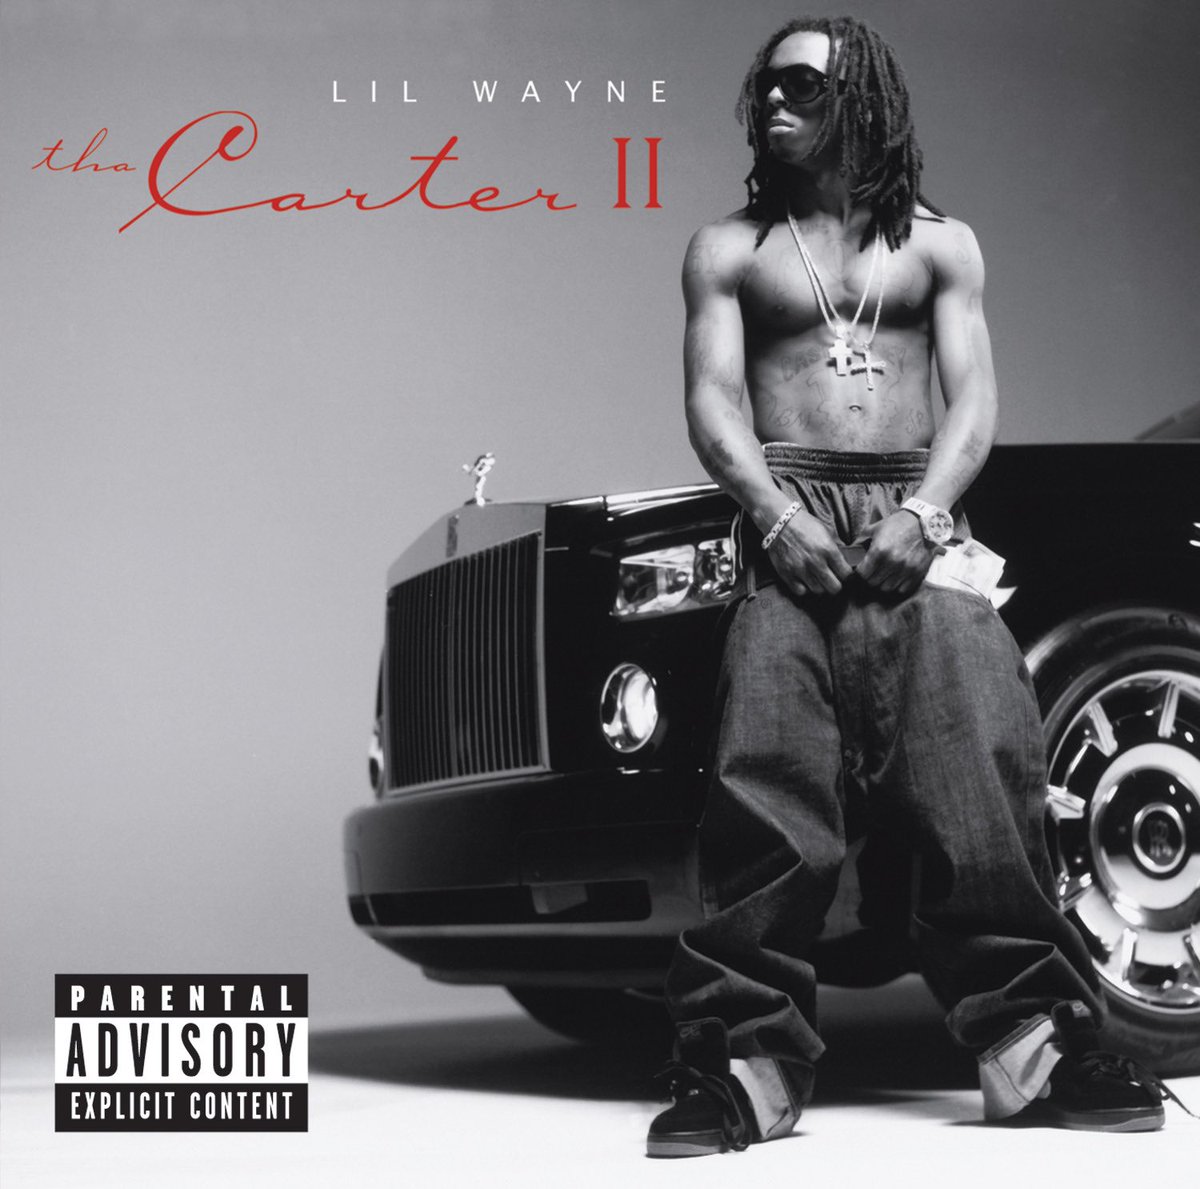 17 years ago today, Lil Wayne dropped Tha Carter II What’s your favorite song on the album? 💽